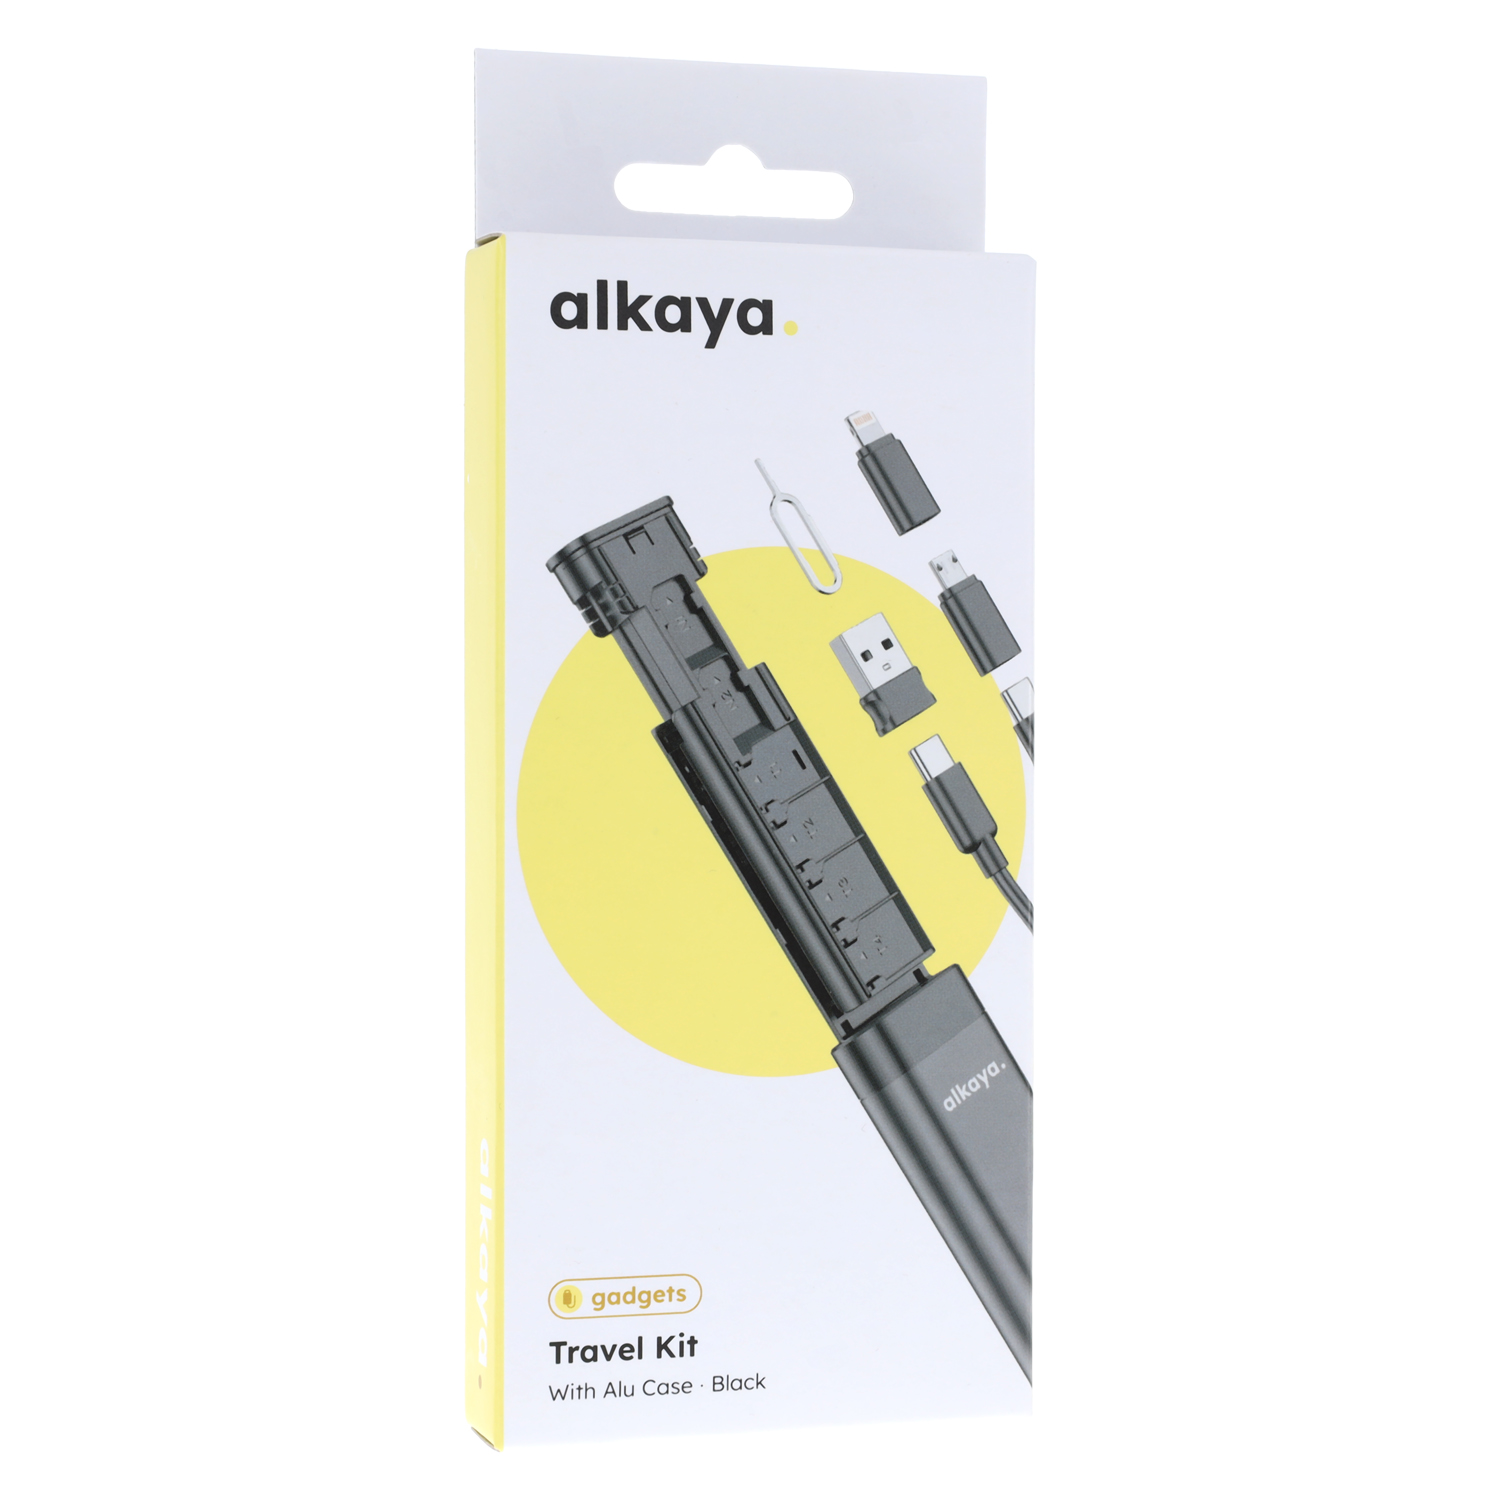 alkaya. | Venture Travel Kit - Aluminum housing with USB-C cable  and adapter connectors for all connections, Black